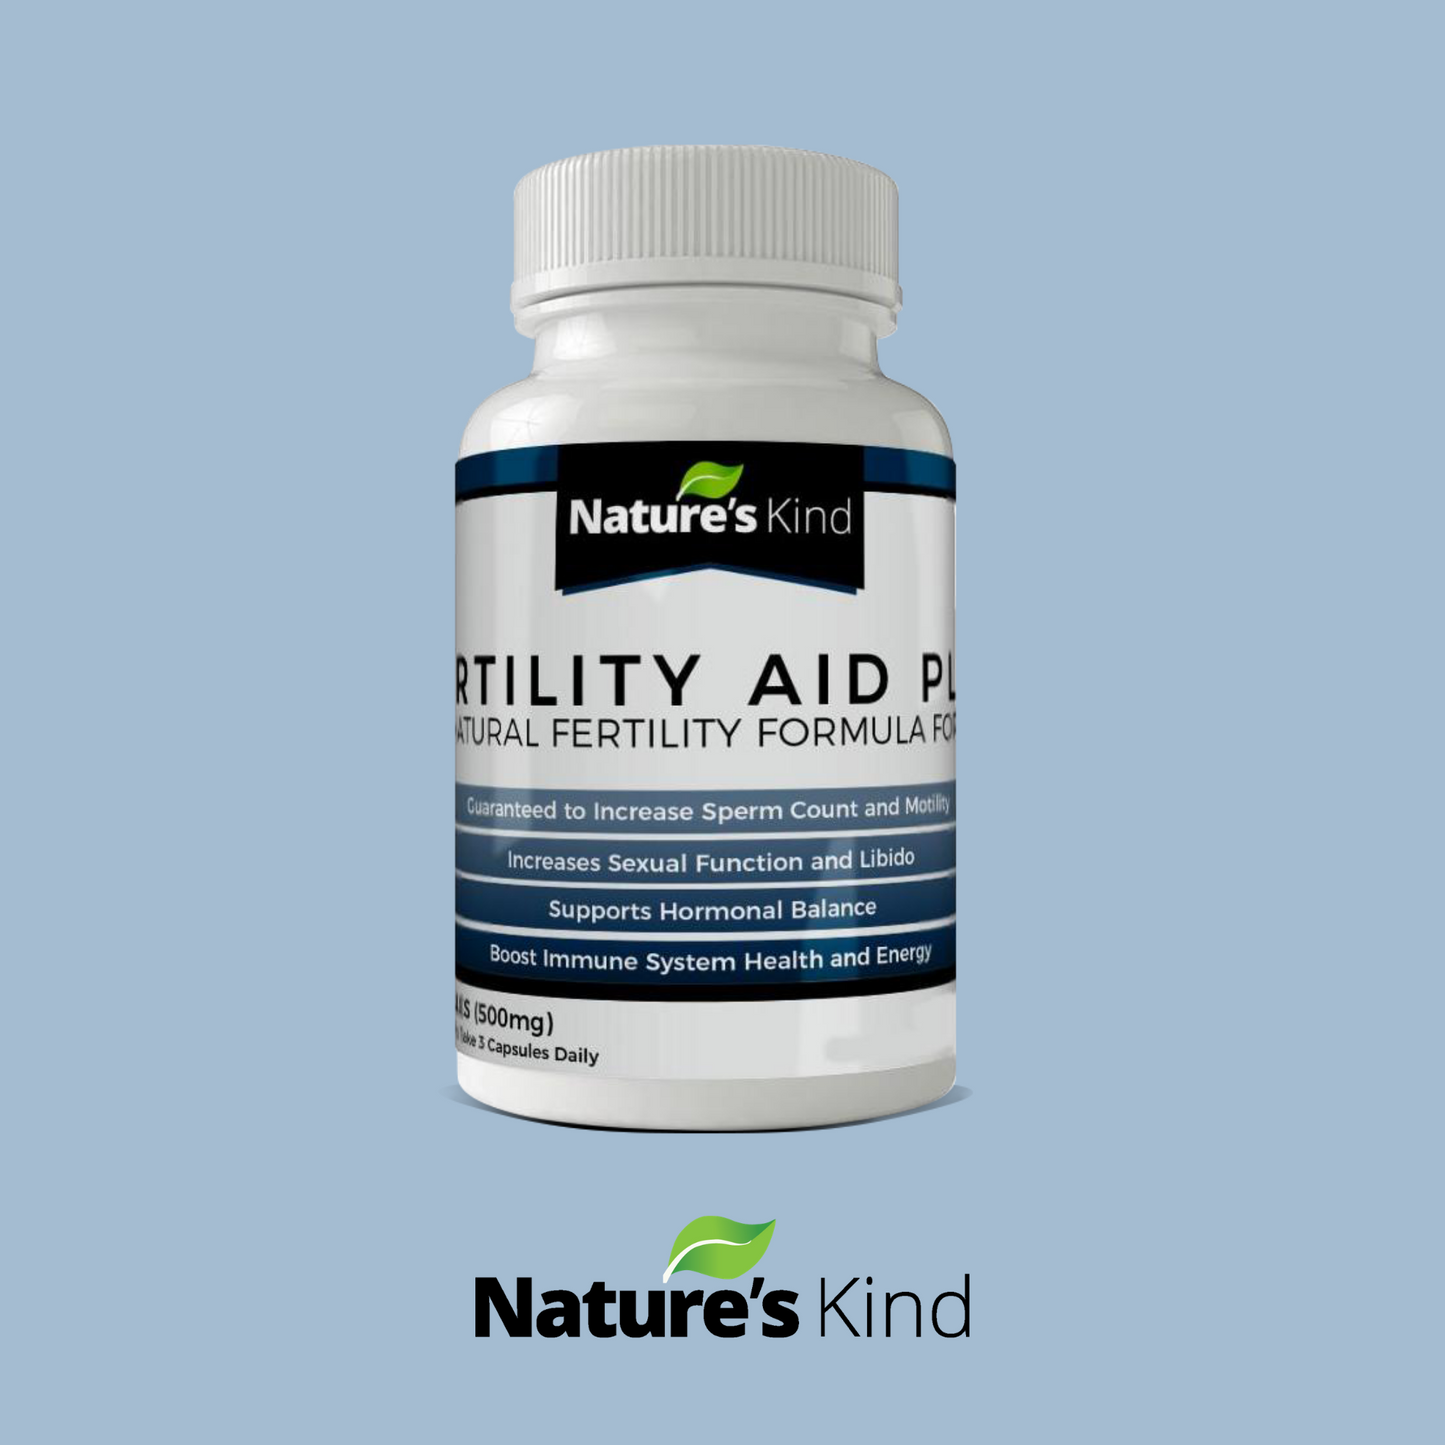 Fertility Aid Plus for Men - FerteeAid Guaranteed to Increase Sperm Count and Motility in Males